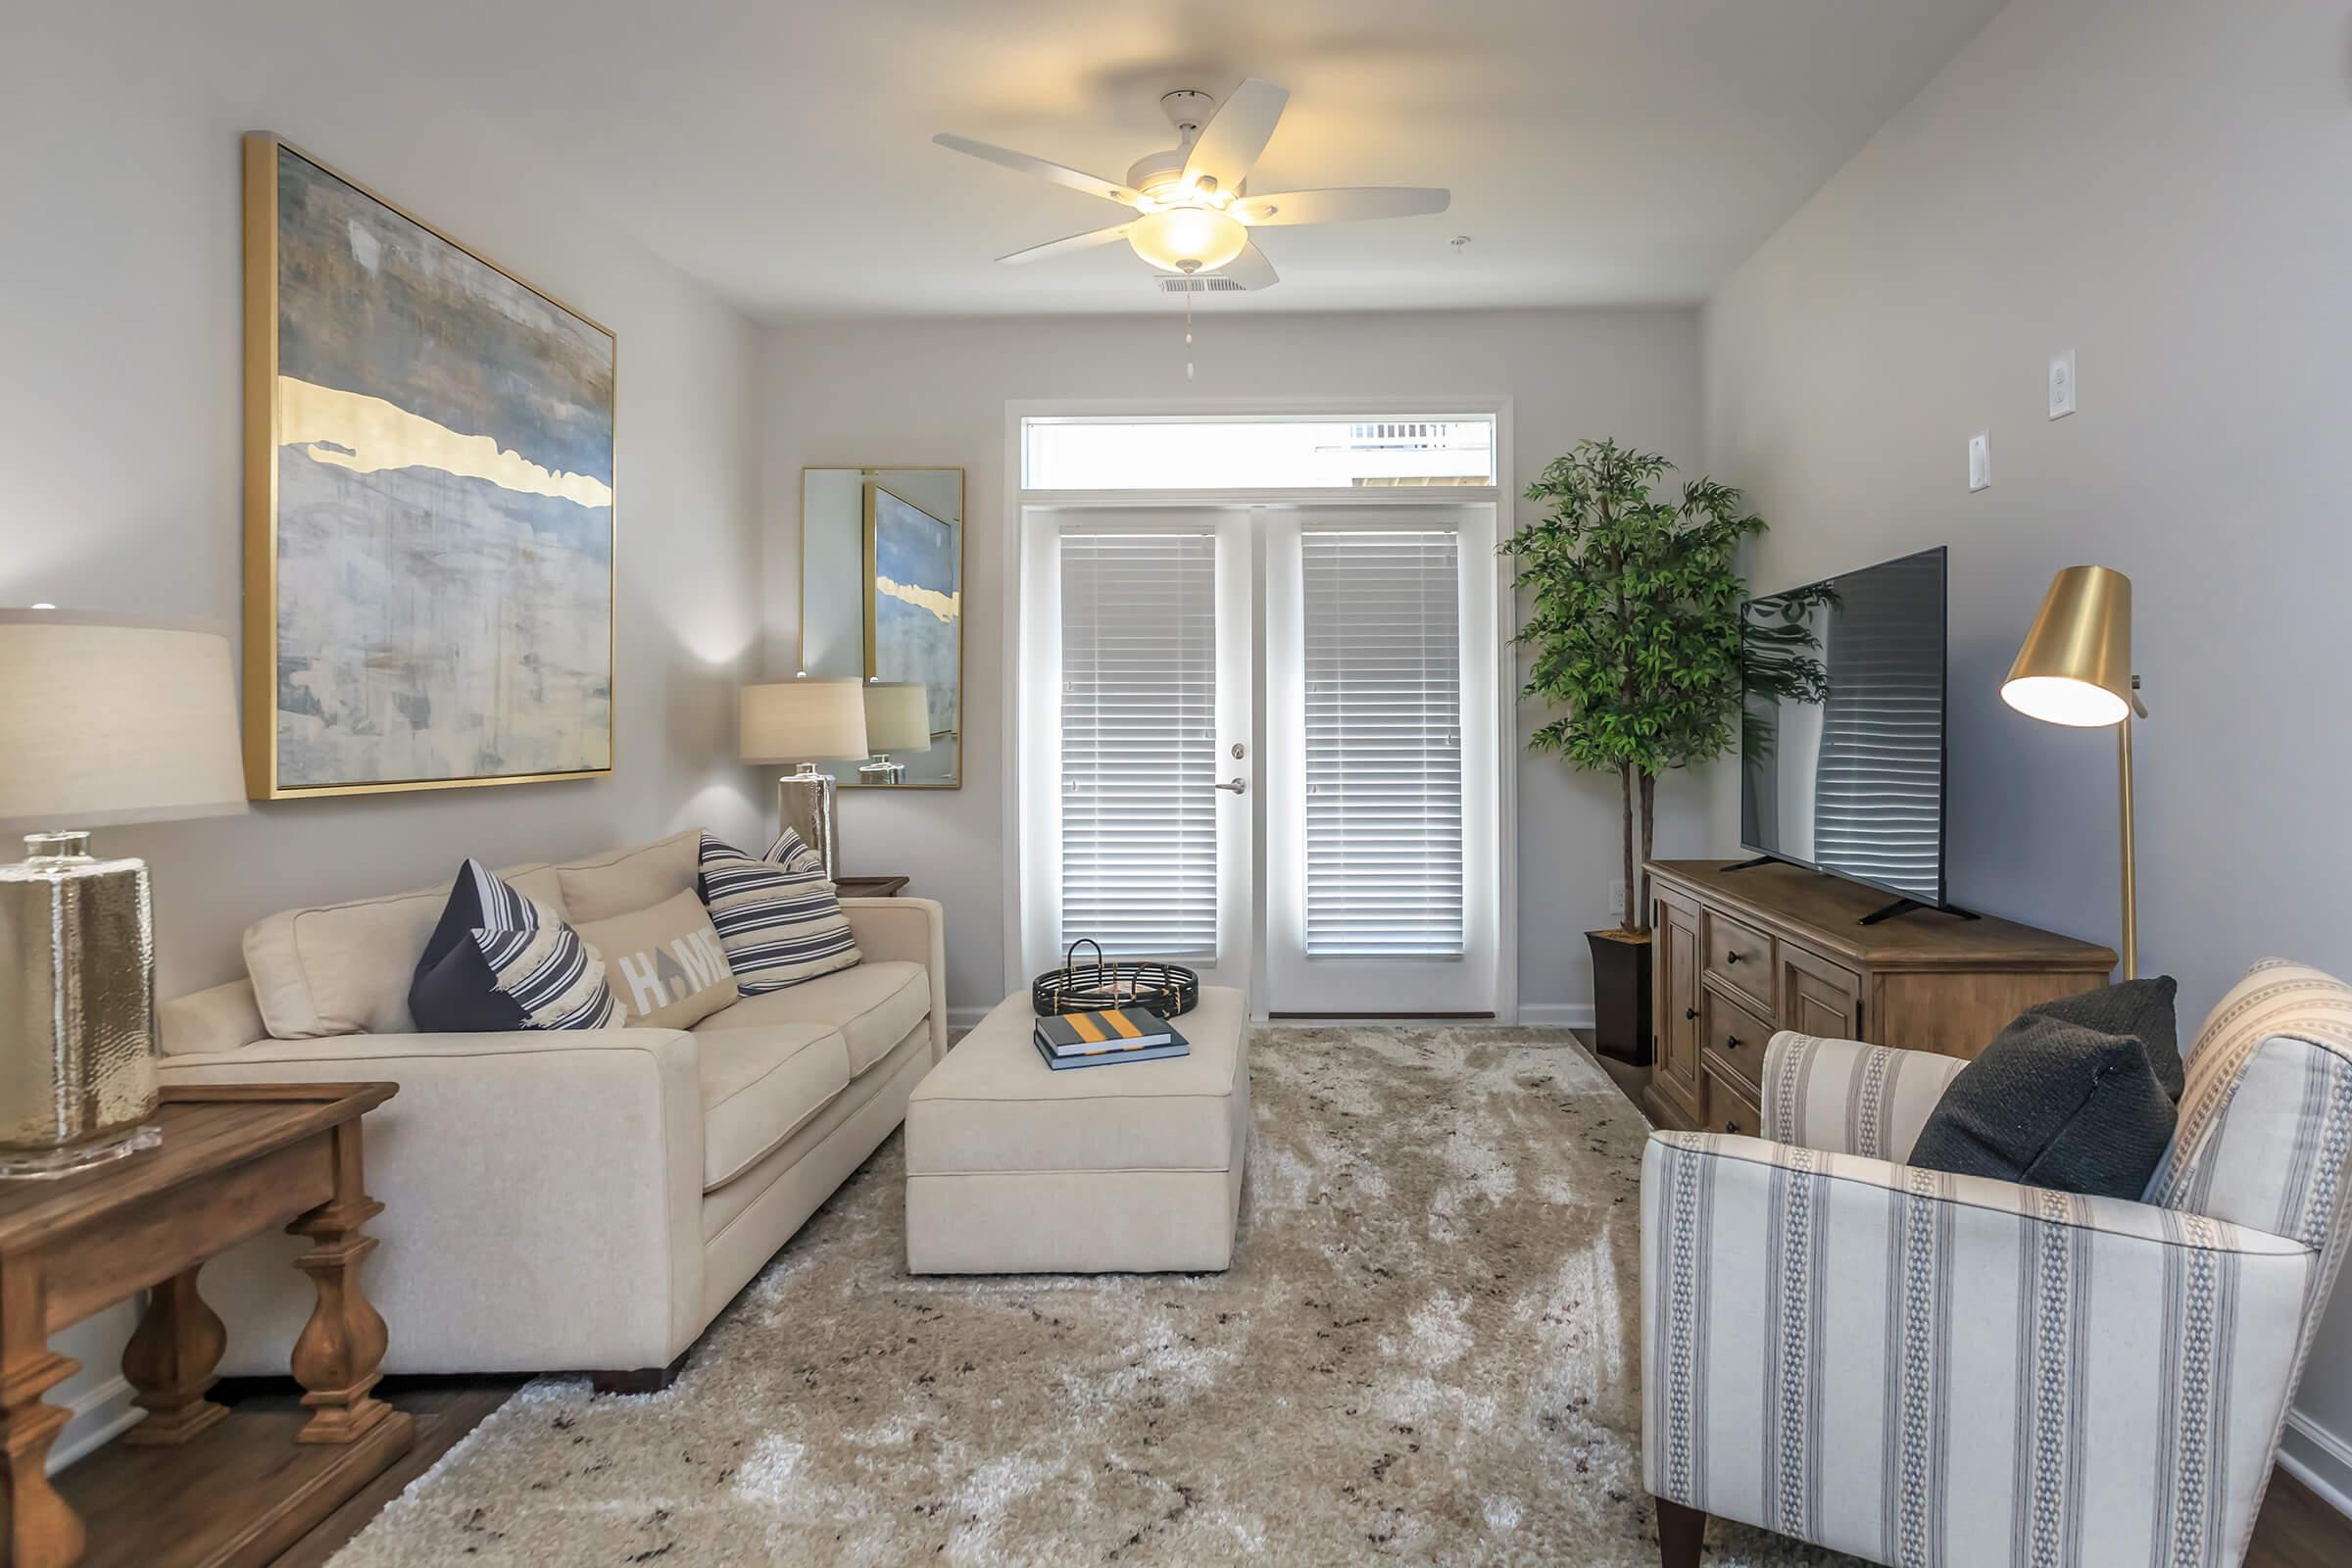 Welcome Home To Riverstone Apartments At Long Shoals In Arden, NC